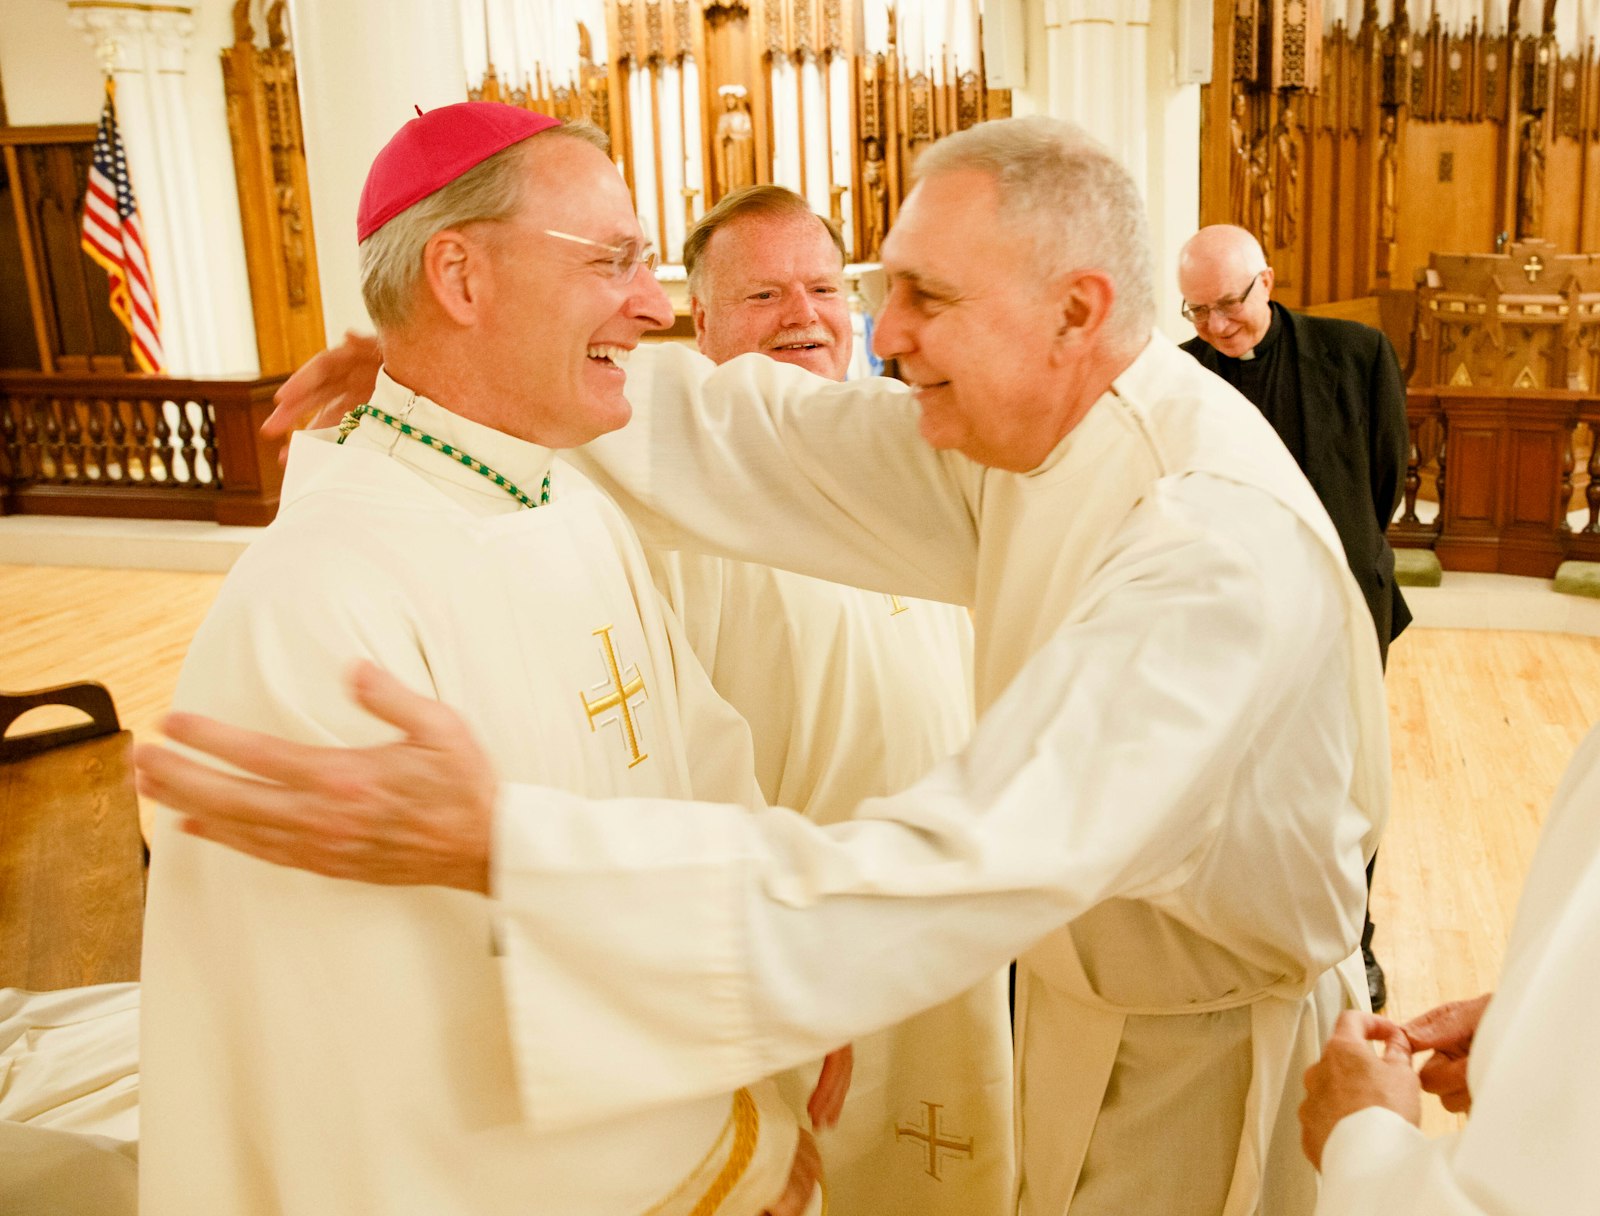 Archbishop Paul F. Russell, left, receives a congratulatory embrace after his episcopal ordination June 3, 2016, at the Cathedral of the Holy Cross in Boston. A priest of the Archdiocese of Boston, Archbishop Russell returned to be ordained a bishop there before being sent by Pope Francis to Turkey to serve as the Holy See's official ambassador there. (Gregory L. Tracy | The Boston Pilot)